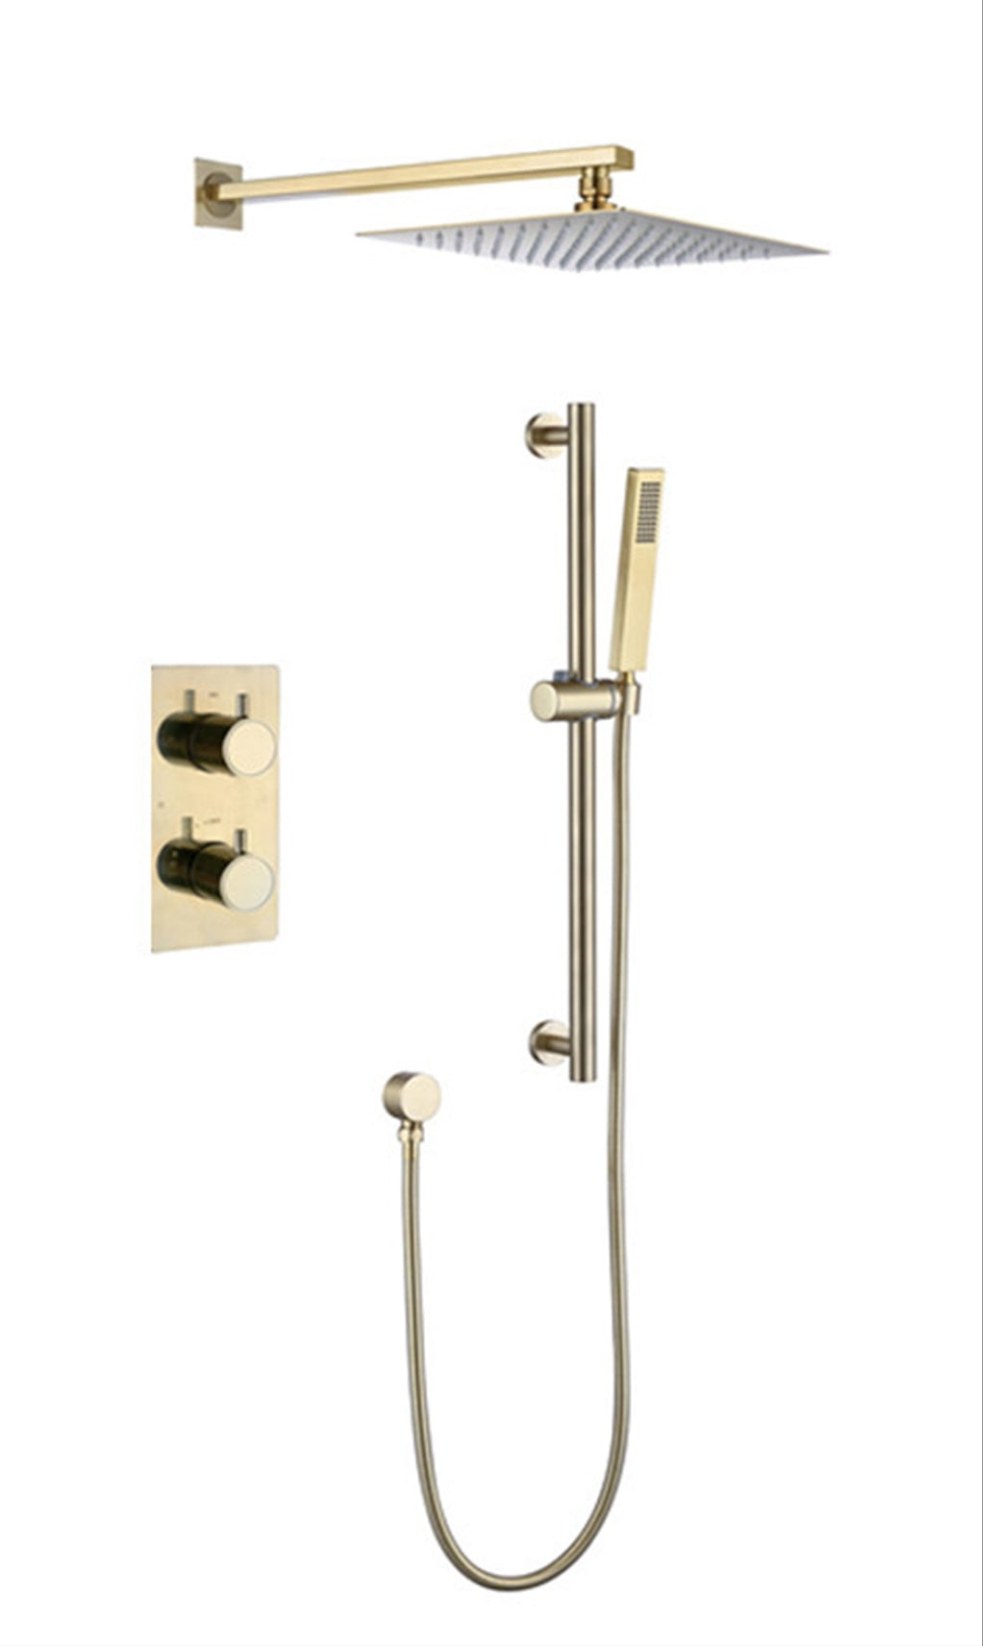 Concealed thermostatic shower mixer, drench head, with or without slide bar.